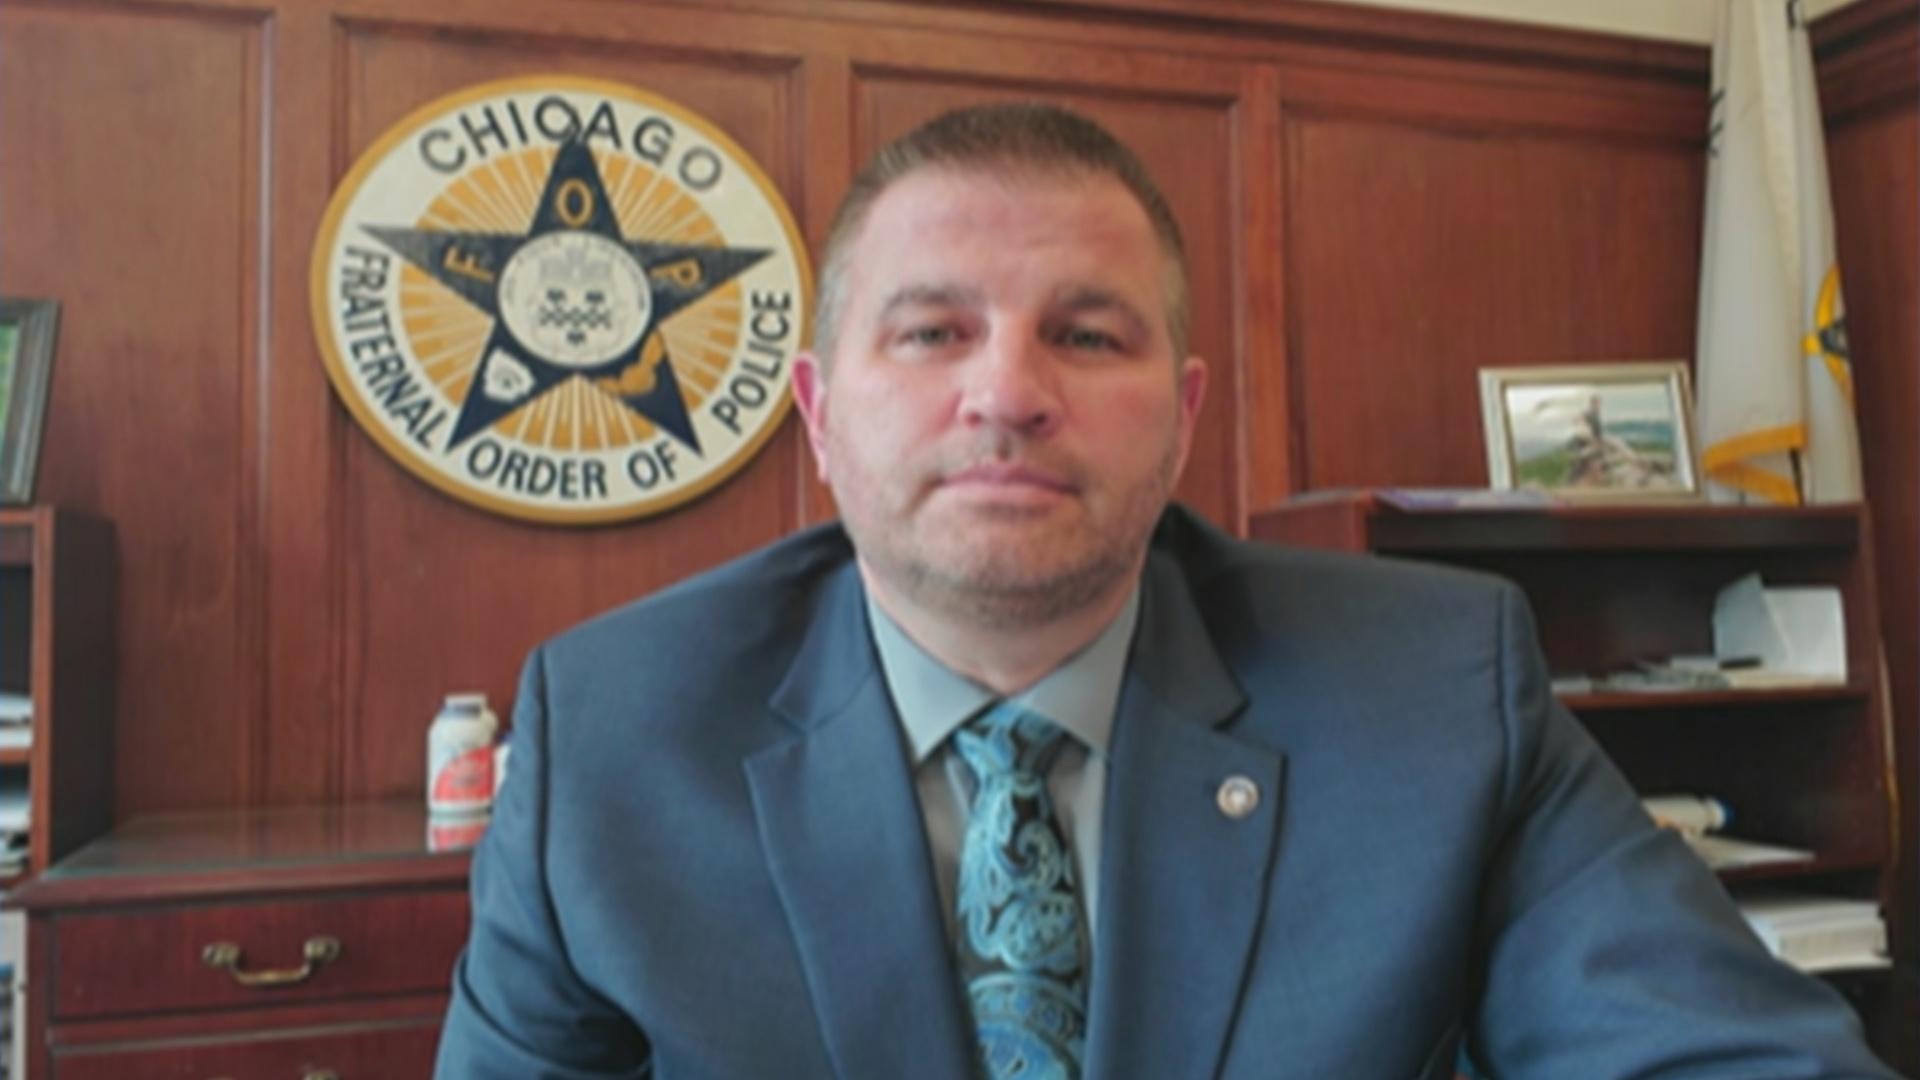 Fraternal Order of Police Lodge 7 President John Catanzara appears on “Chicago Tonight” via Zoom on May 14, 2020. (WTTW News)